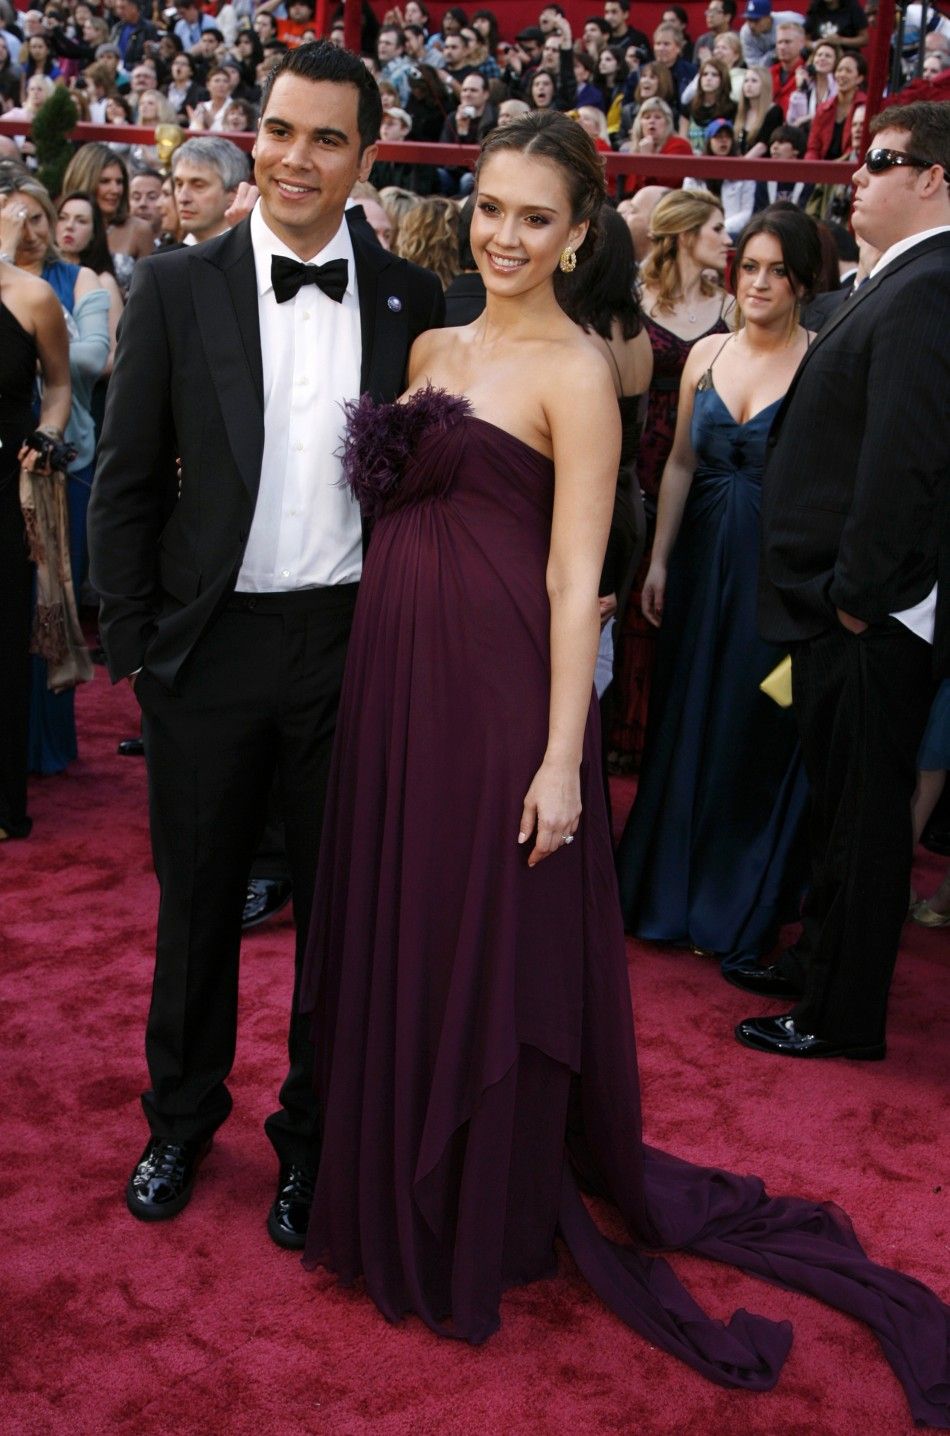 Actress Jessica Alba and her boyfriend Cash Warren arrive at the 80th annual Academy Awards in Hollywood